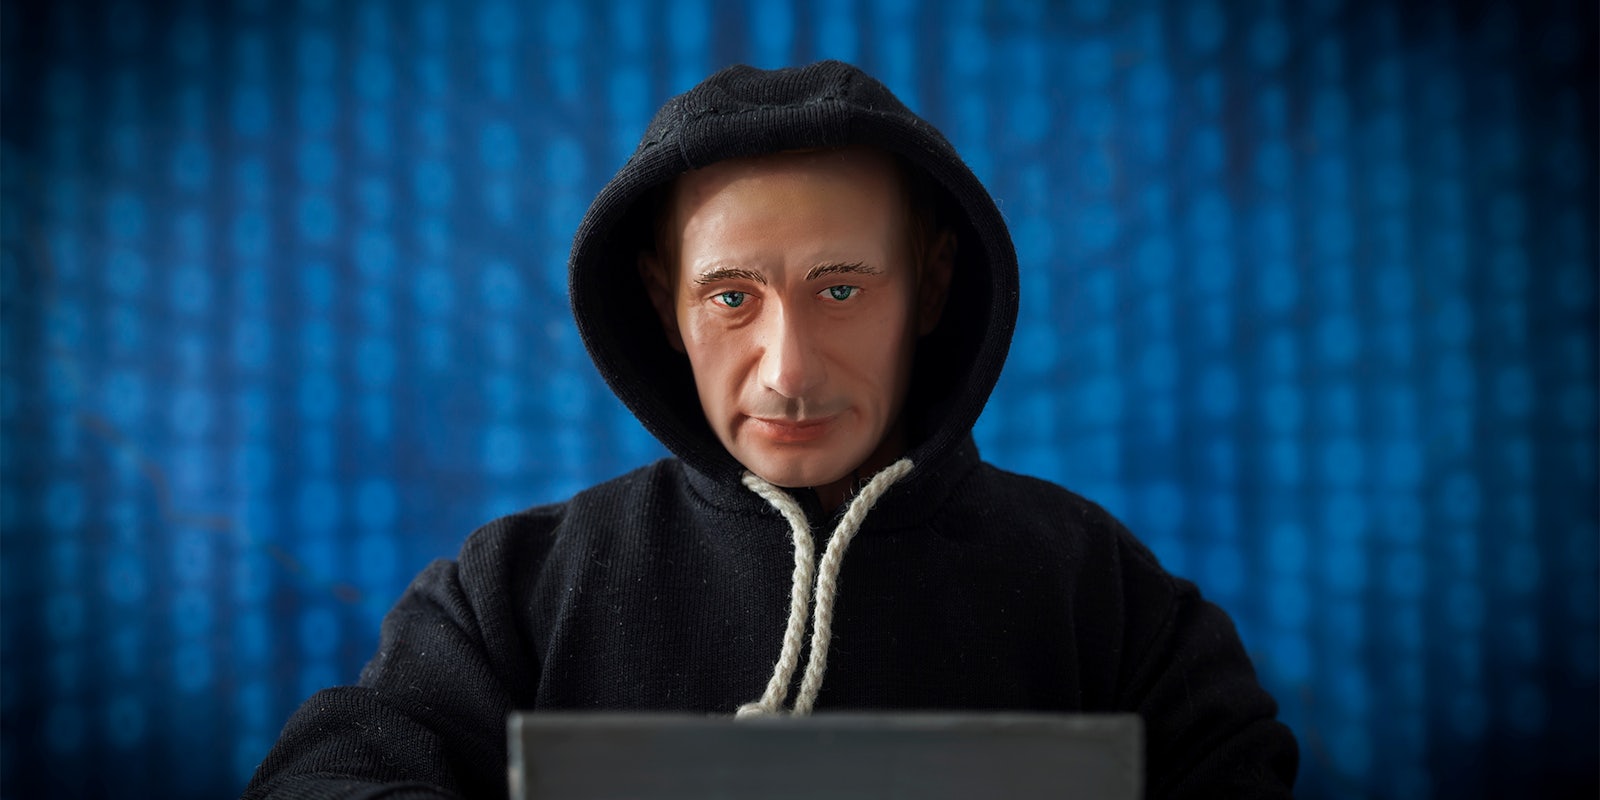 Caricature of Russian President Vladimir Putin in an election hacking concept - in a dark hoodie, at a laptop with binary code